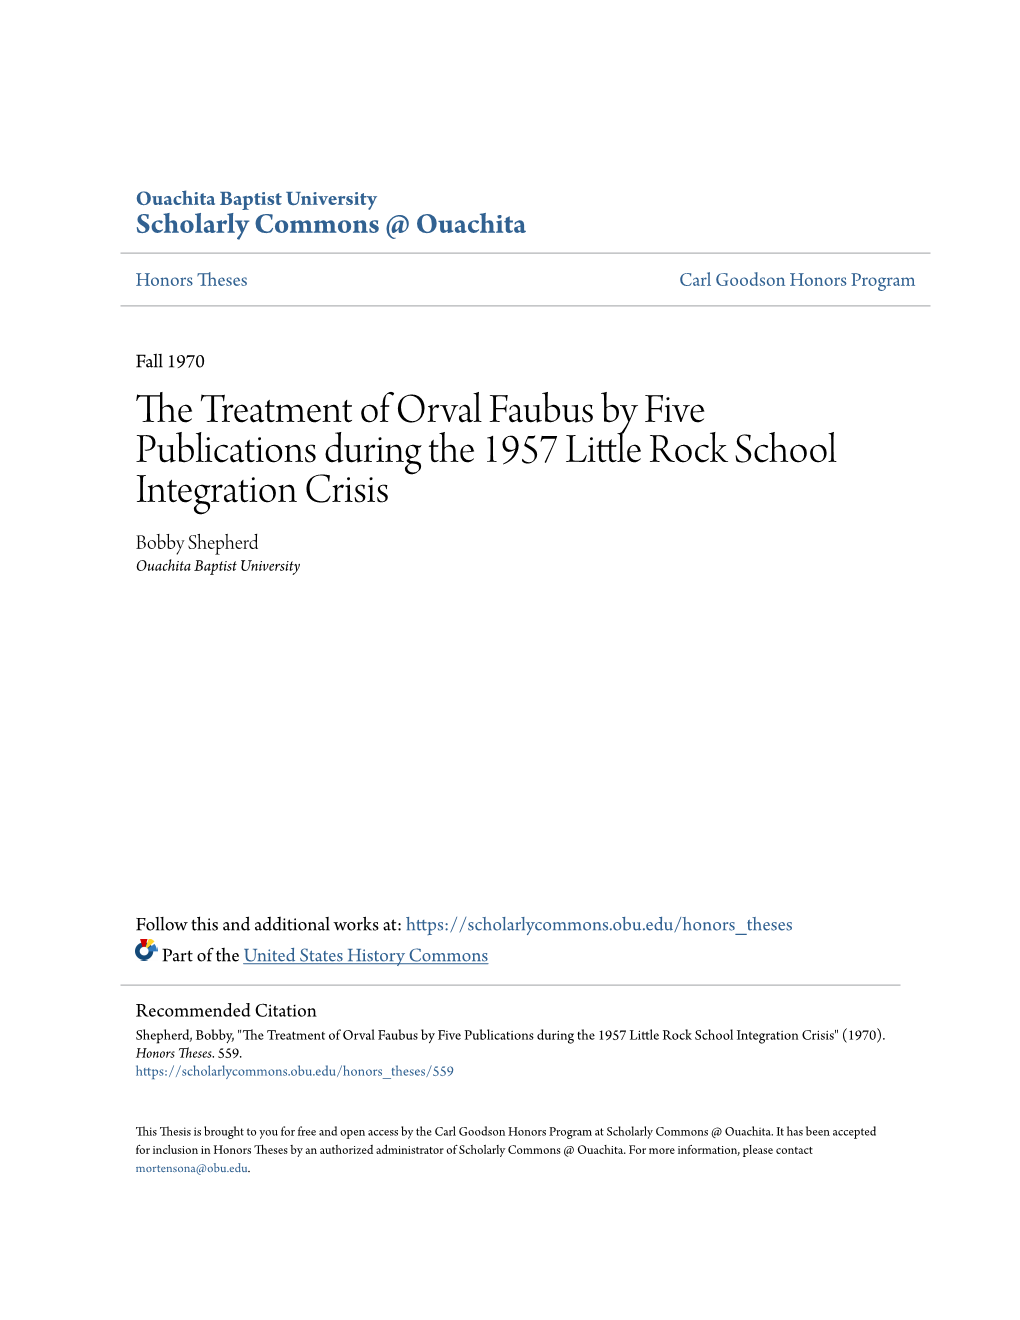 The Treatment of Orval Faubus by Five Publications During the 1957 Little Rock School Integration Crisis